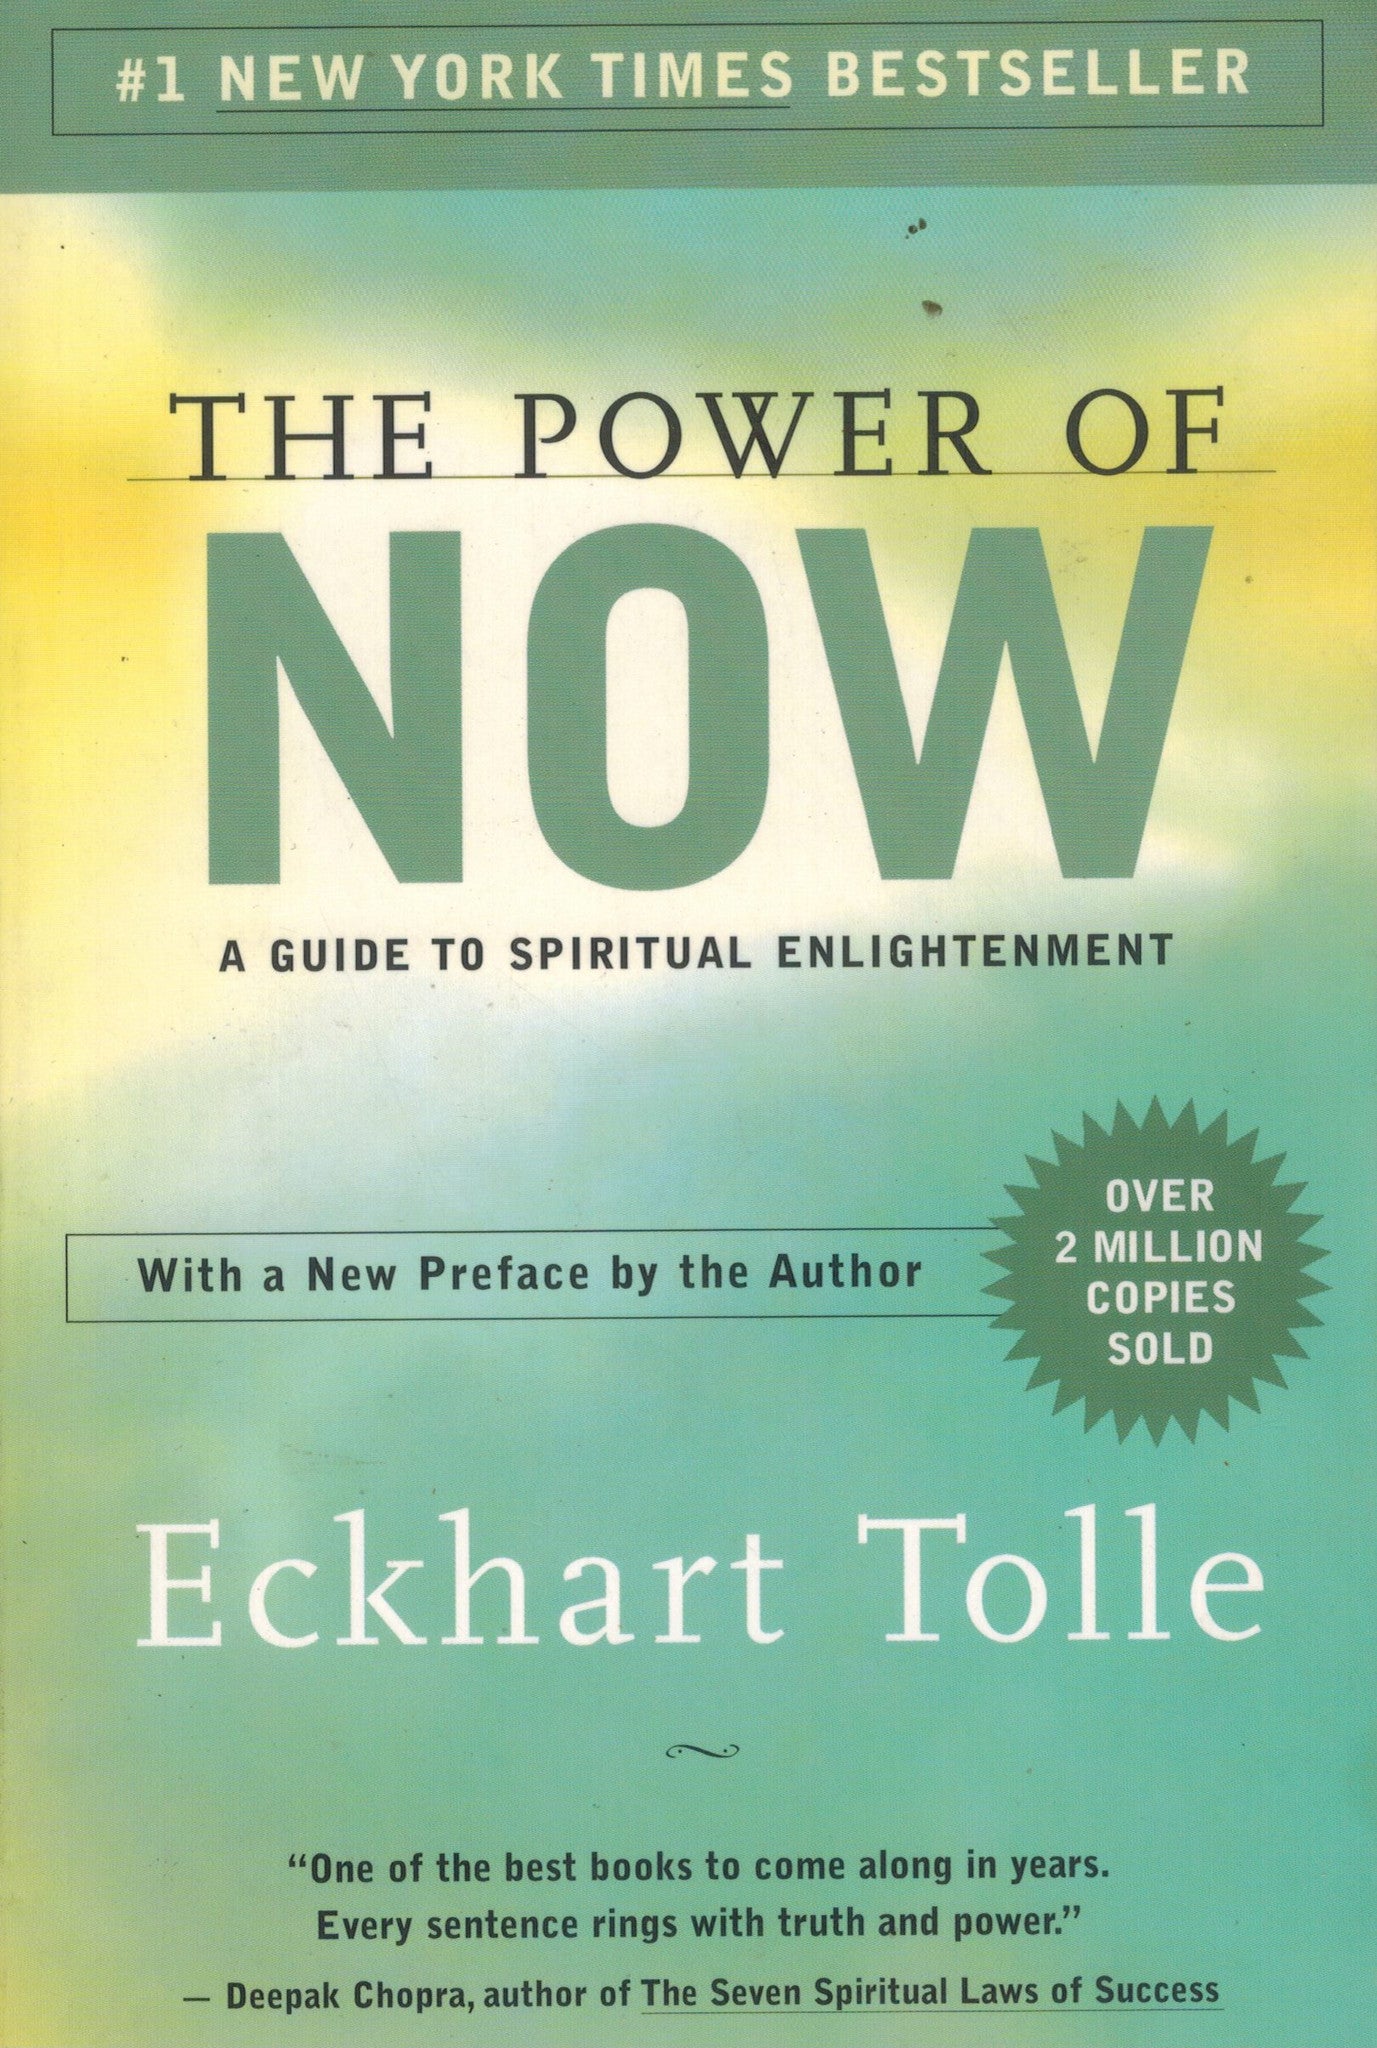 the power of now : A Guide to Spiritual Enlightenment